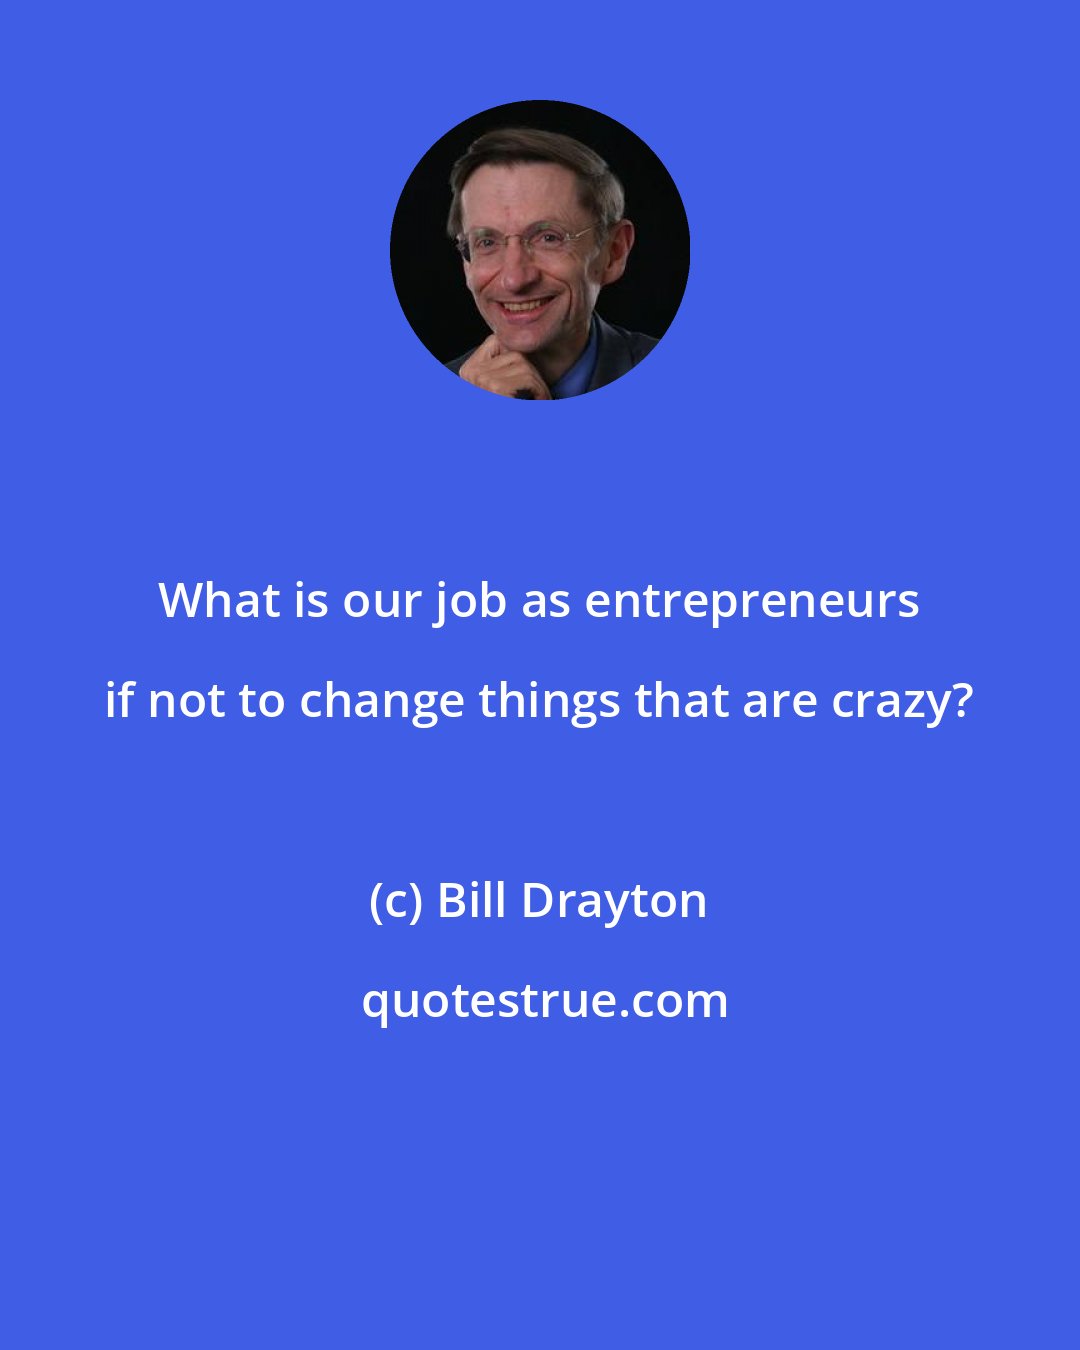 Bill Drayton: What is our job as entrepreneurs if not to change things that are crazy?